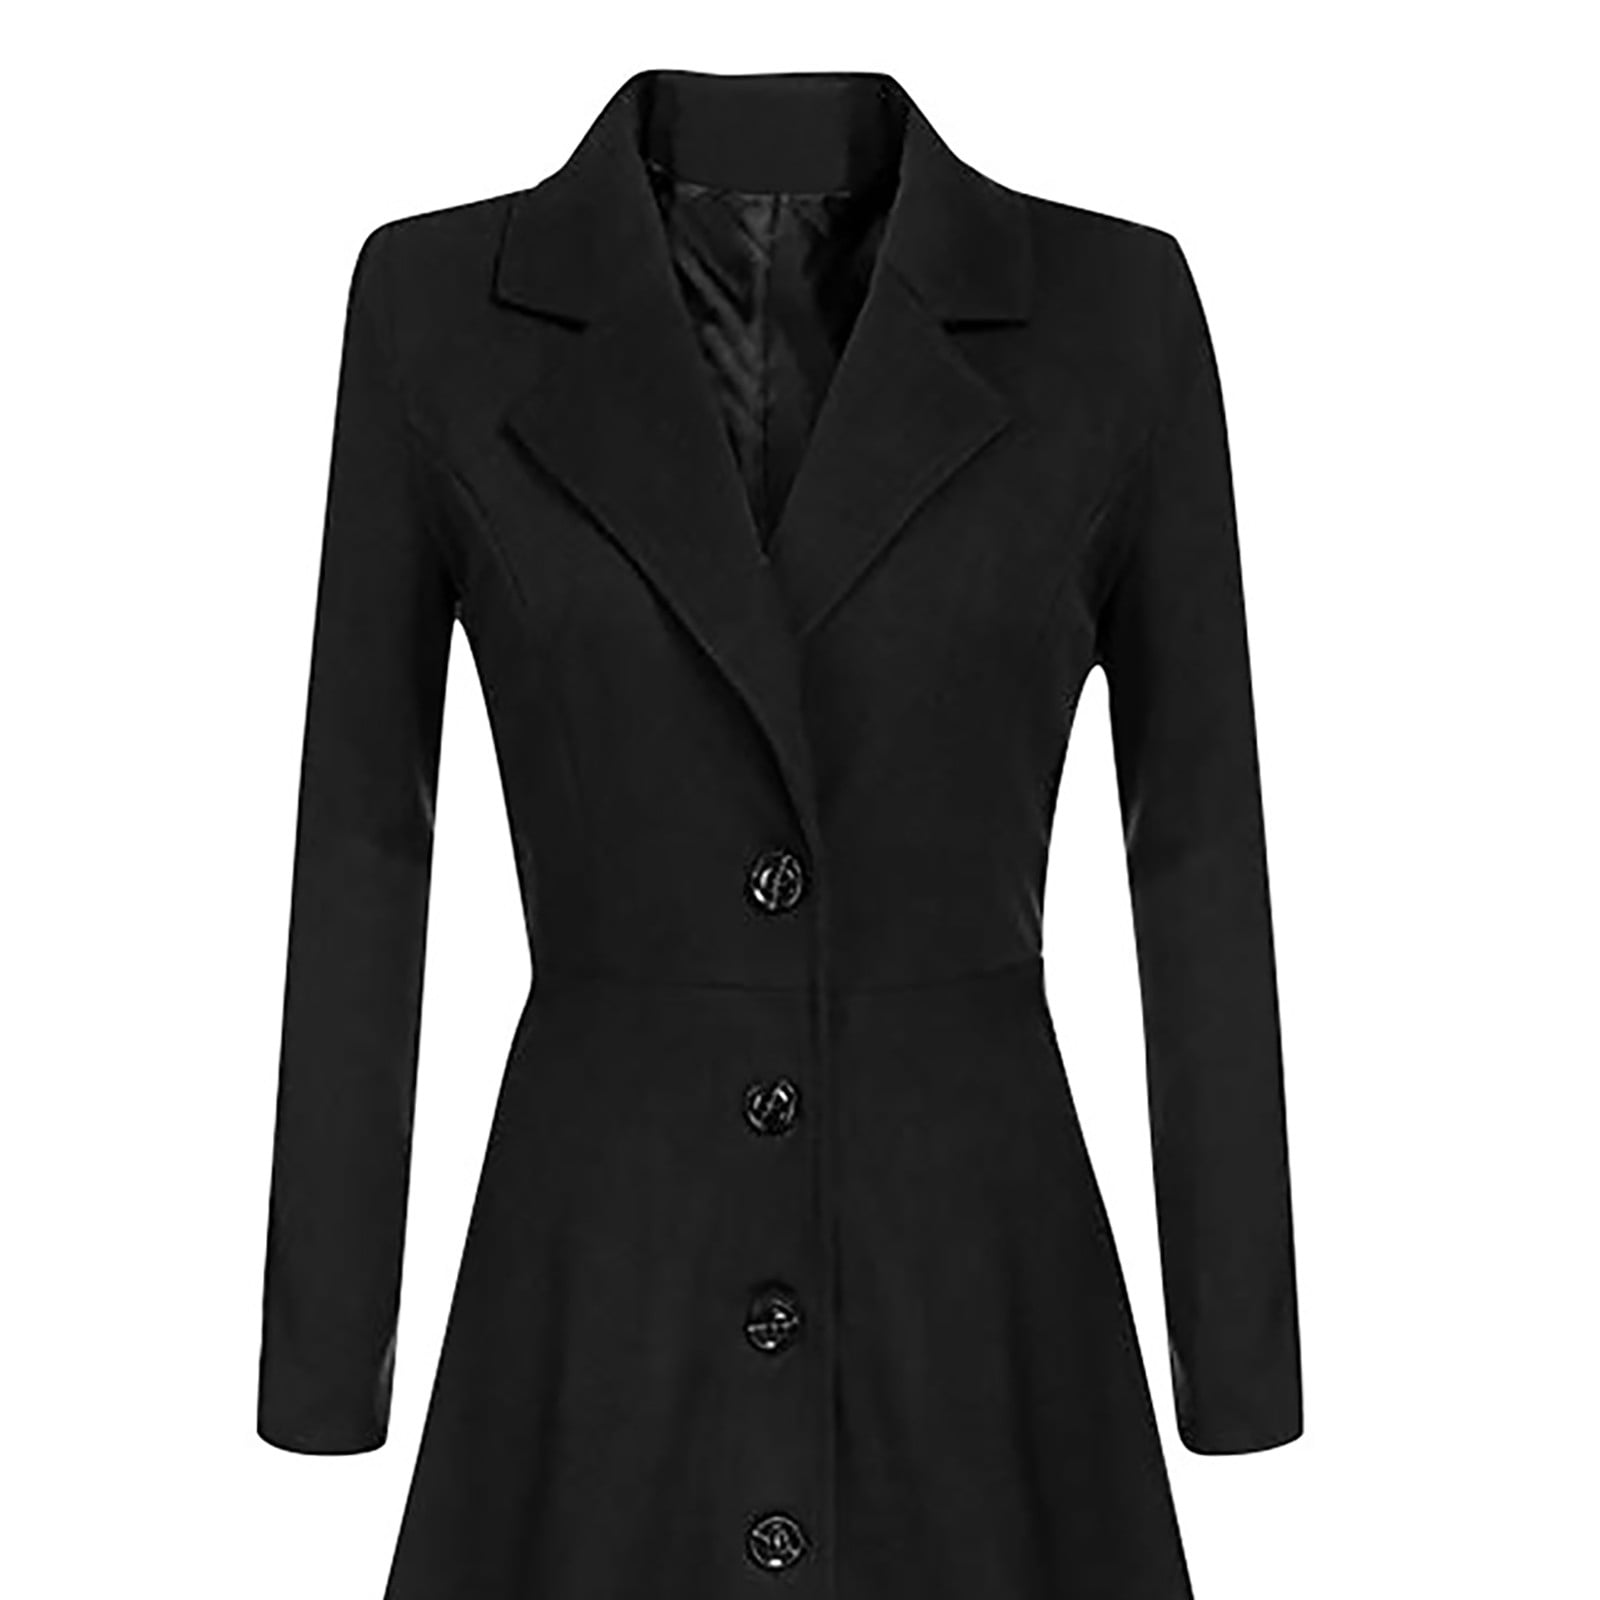 Smihono Reduced Faux Collar Waisted Lapel Wool Coat Trench Jacket Clearance Womens Plus Slim Fit Winter Warm Long Sleeve Overcoat Female Outerwear XL